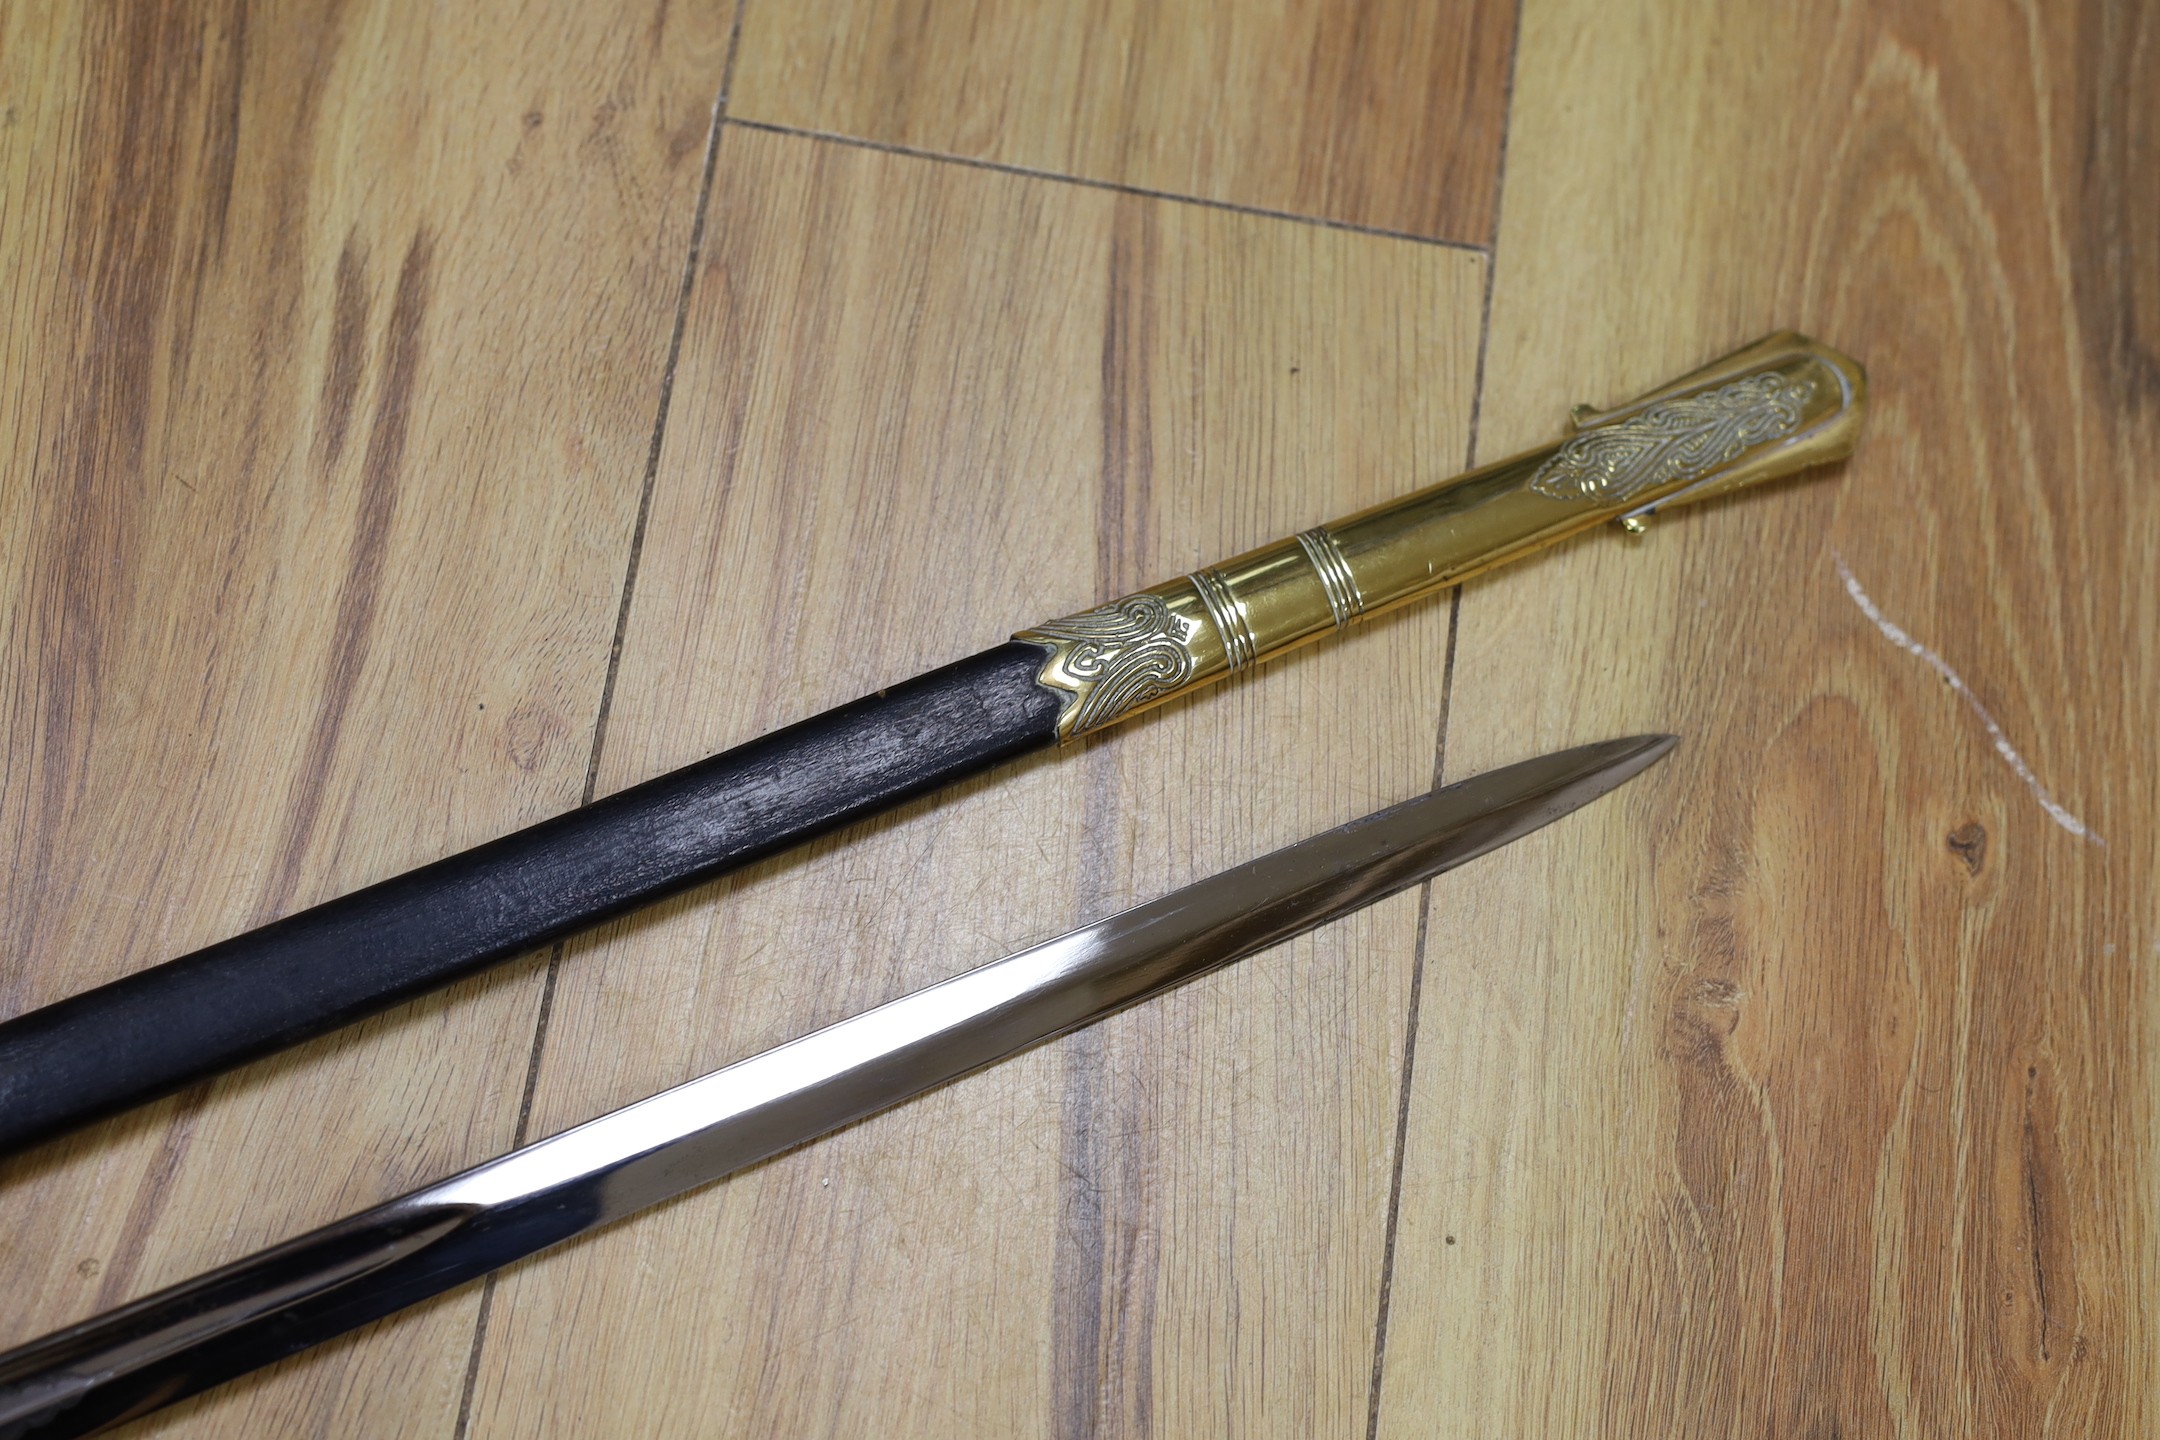 A QEII Naval officer's dress sword and scabbard